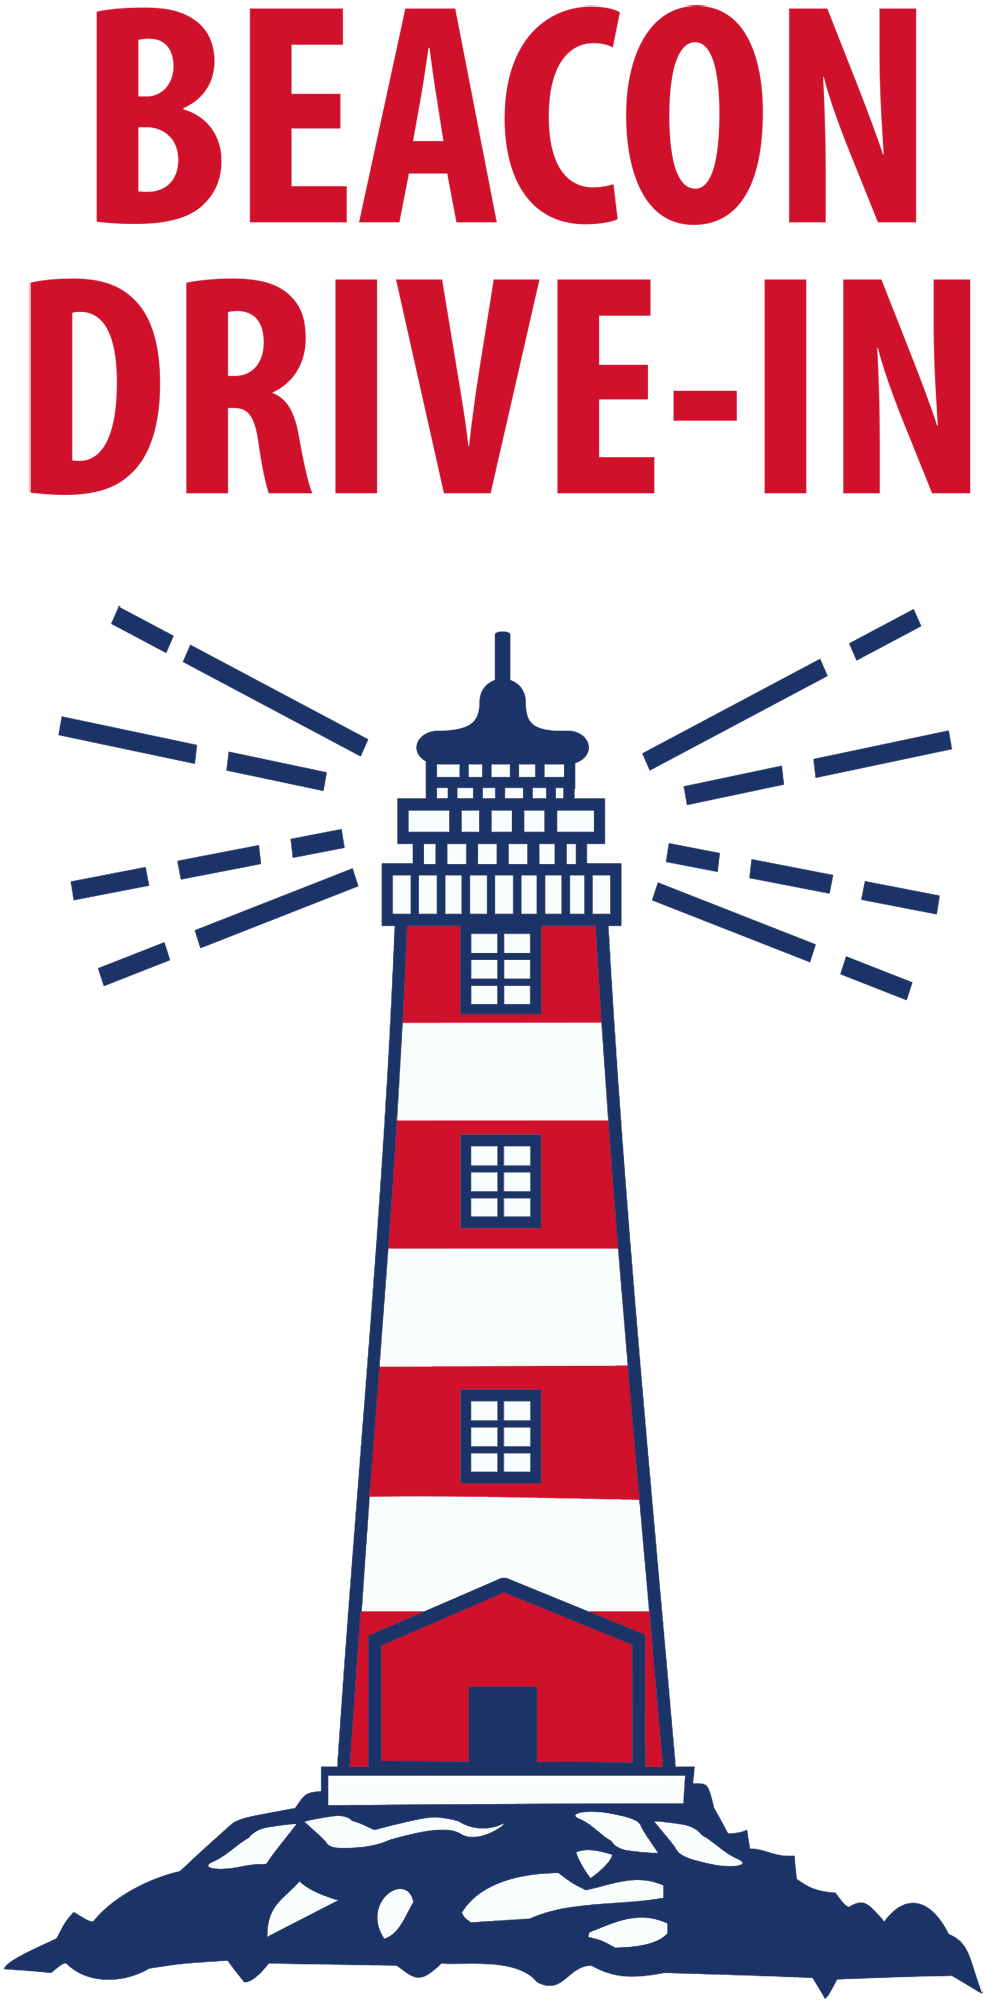 The drive in logo. Lighthouse clipart beacon